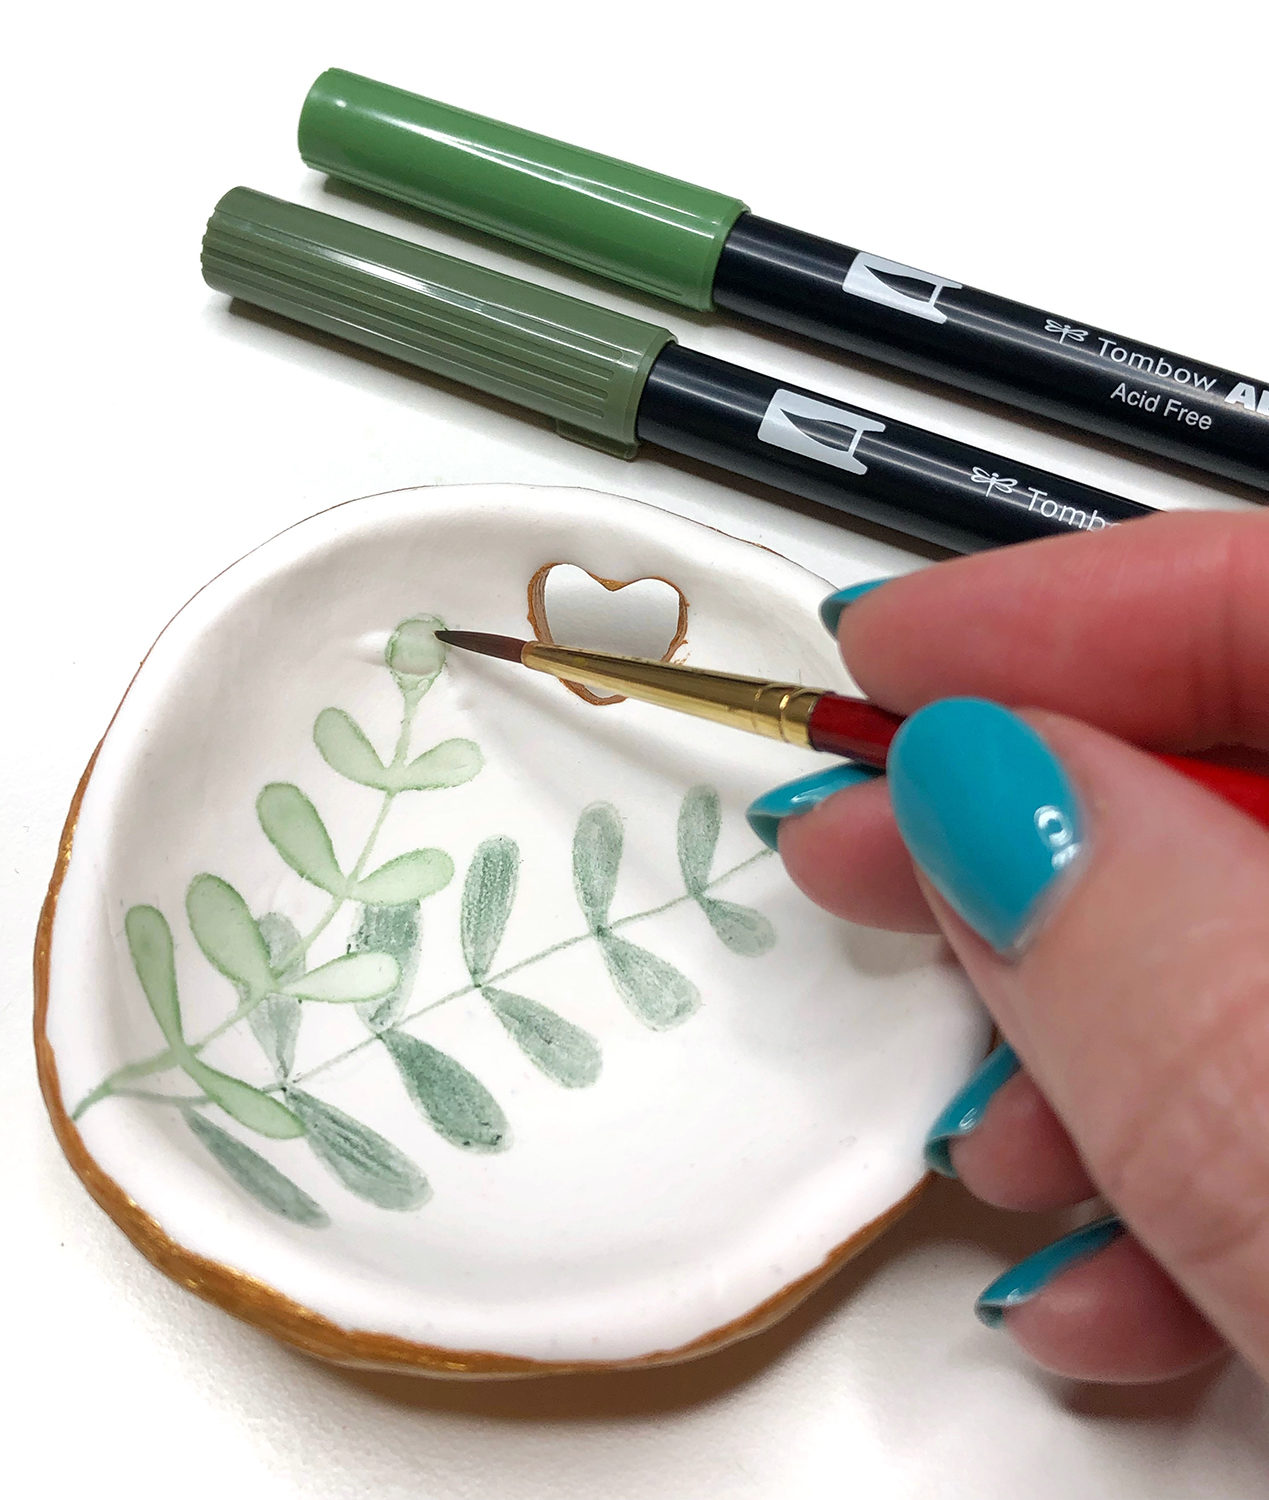 Make a Decorated Ring Bowl for Mother's Day by Jessica Mack on behalf of Tombow